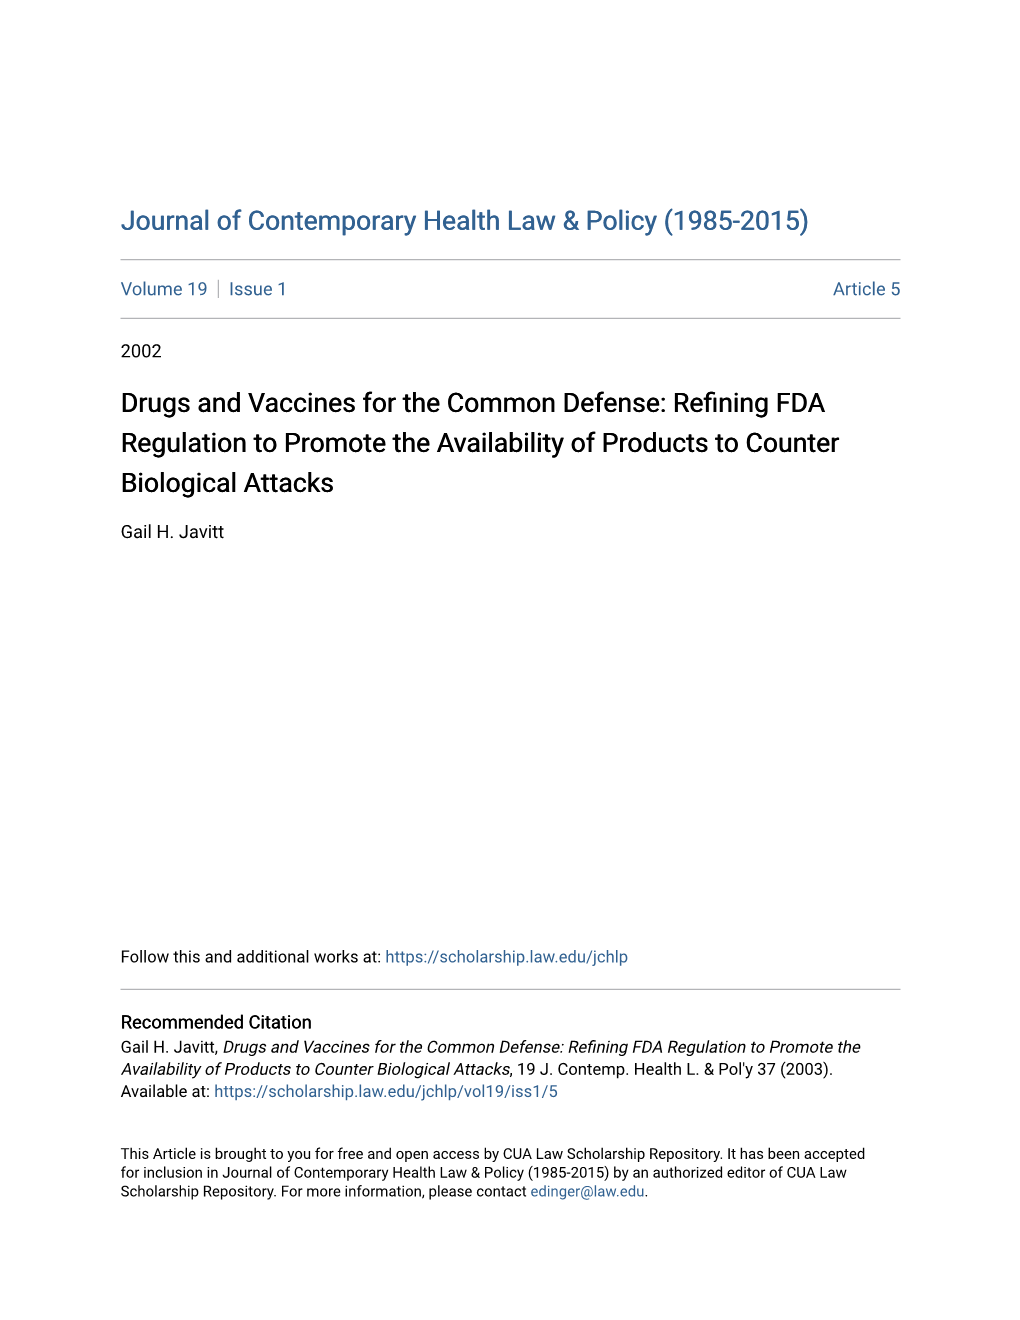 Drugs and Vaccines for the Common Defense: Refining FDA Regulation to Promote the Availability of Products to Counter Biological Attacks